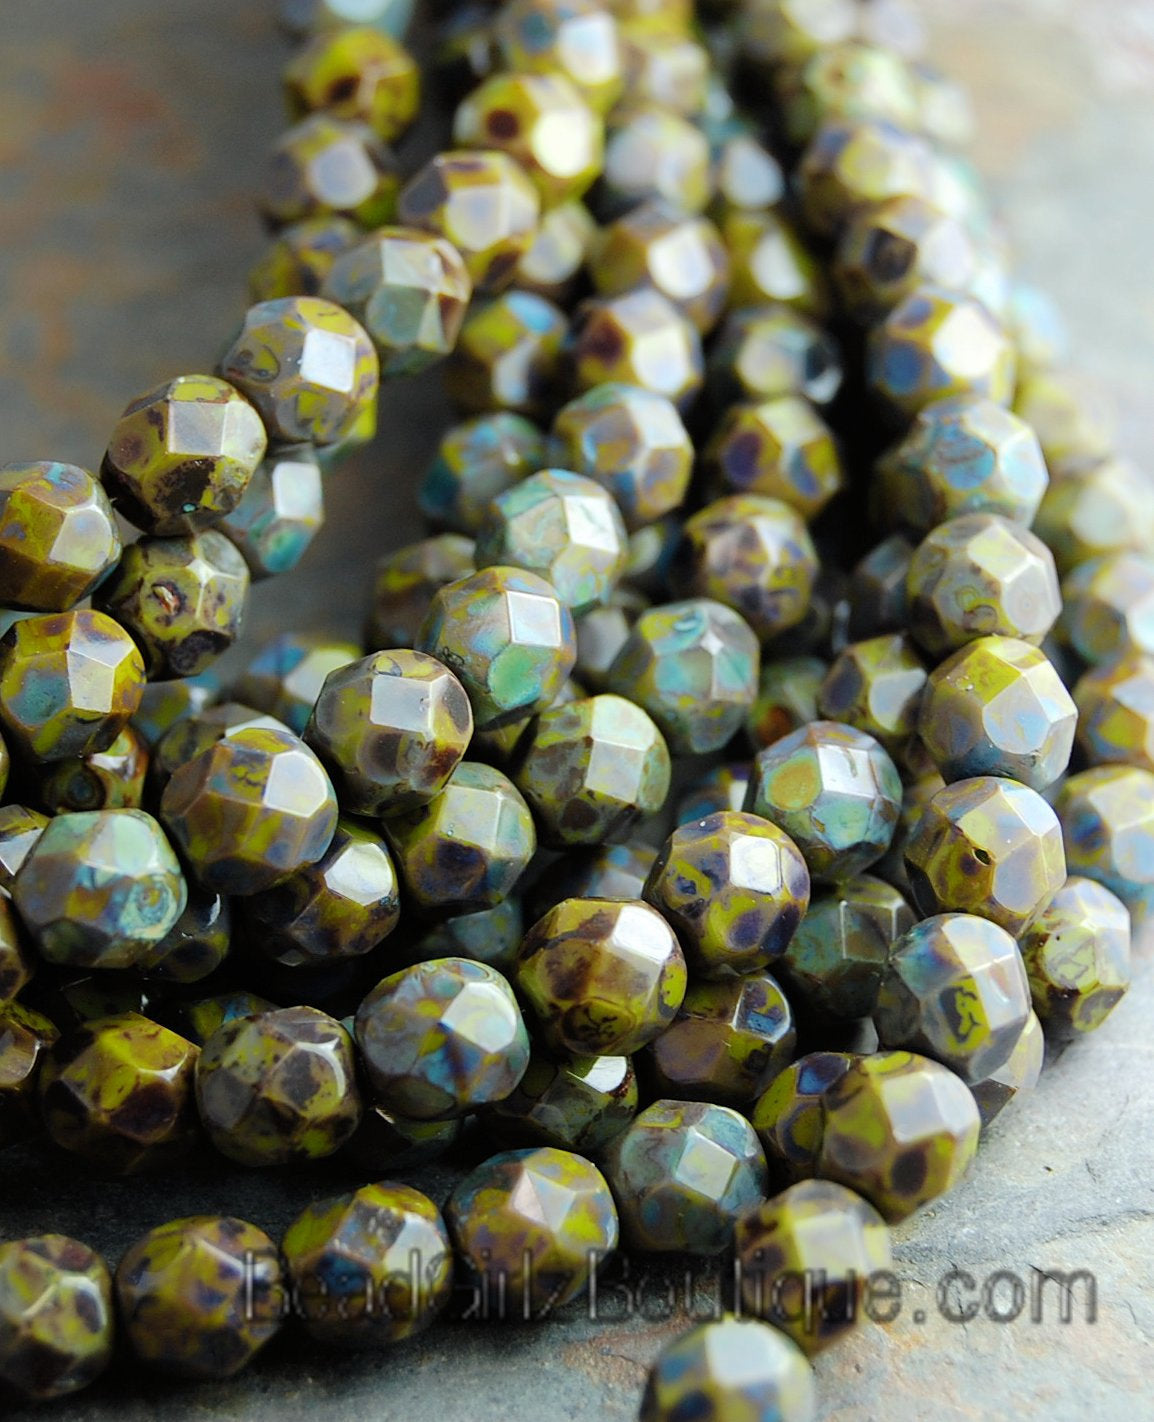 Opaque Olive Picasso Czech Glass Bead 6mm Round - 25 Pc